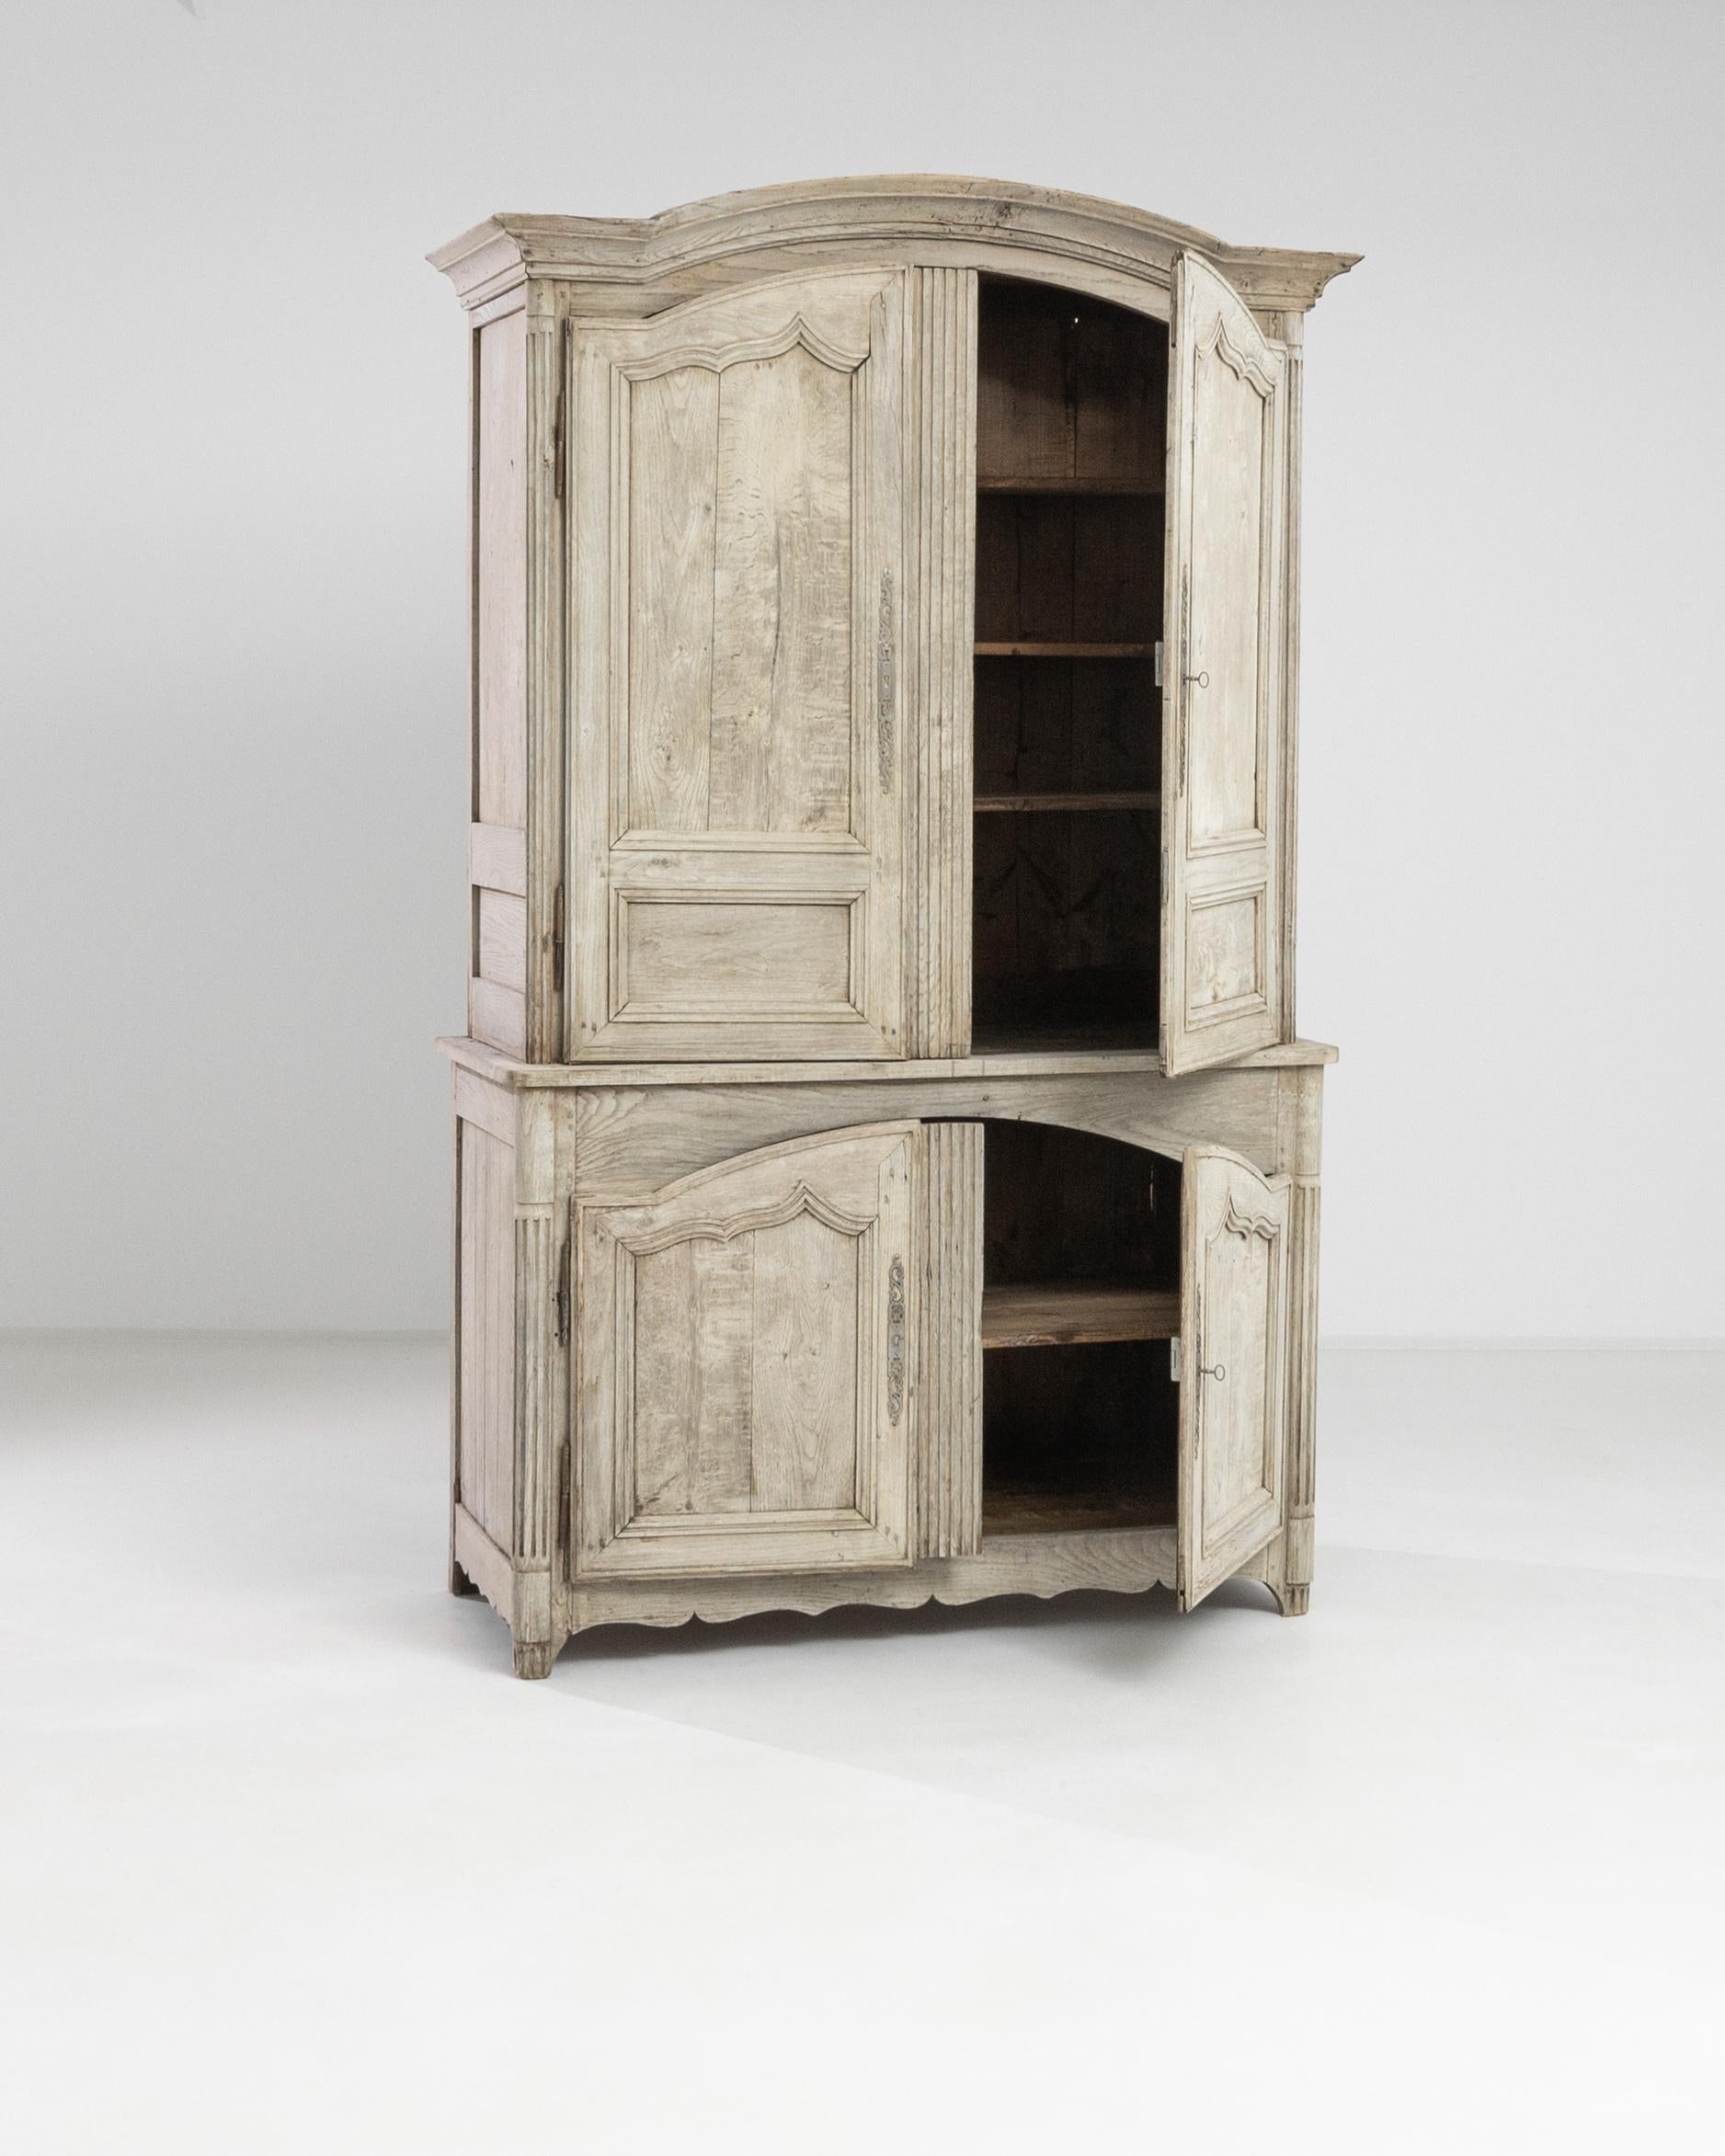 French Provincial 19th Century French Wooden Cabinet For Sale